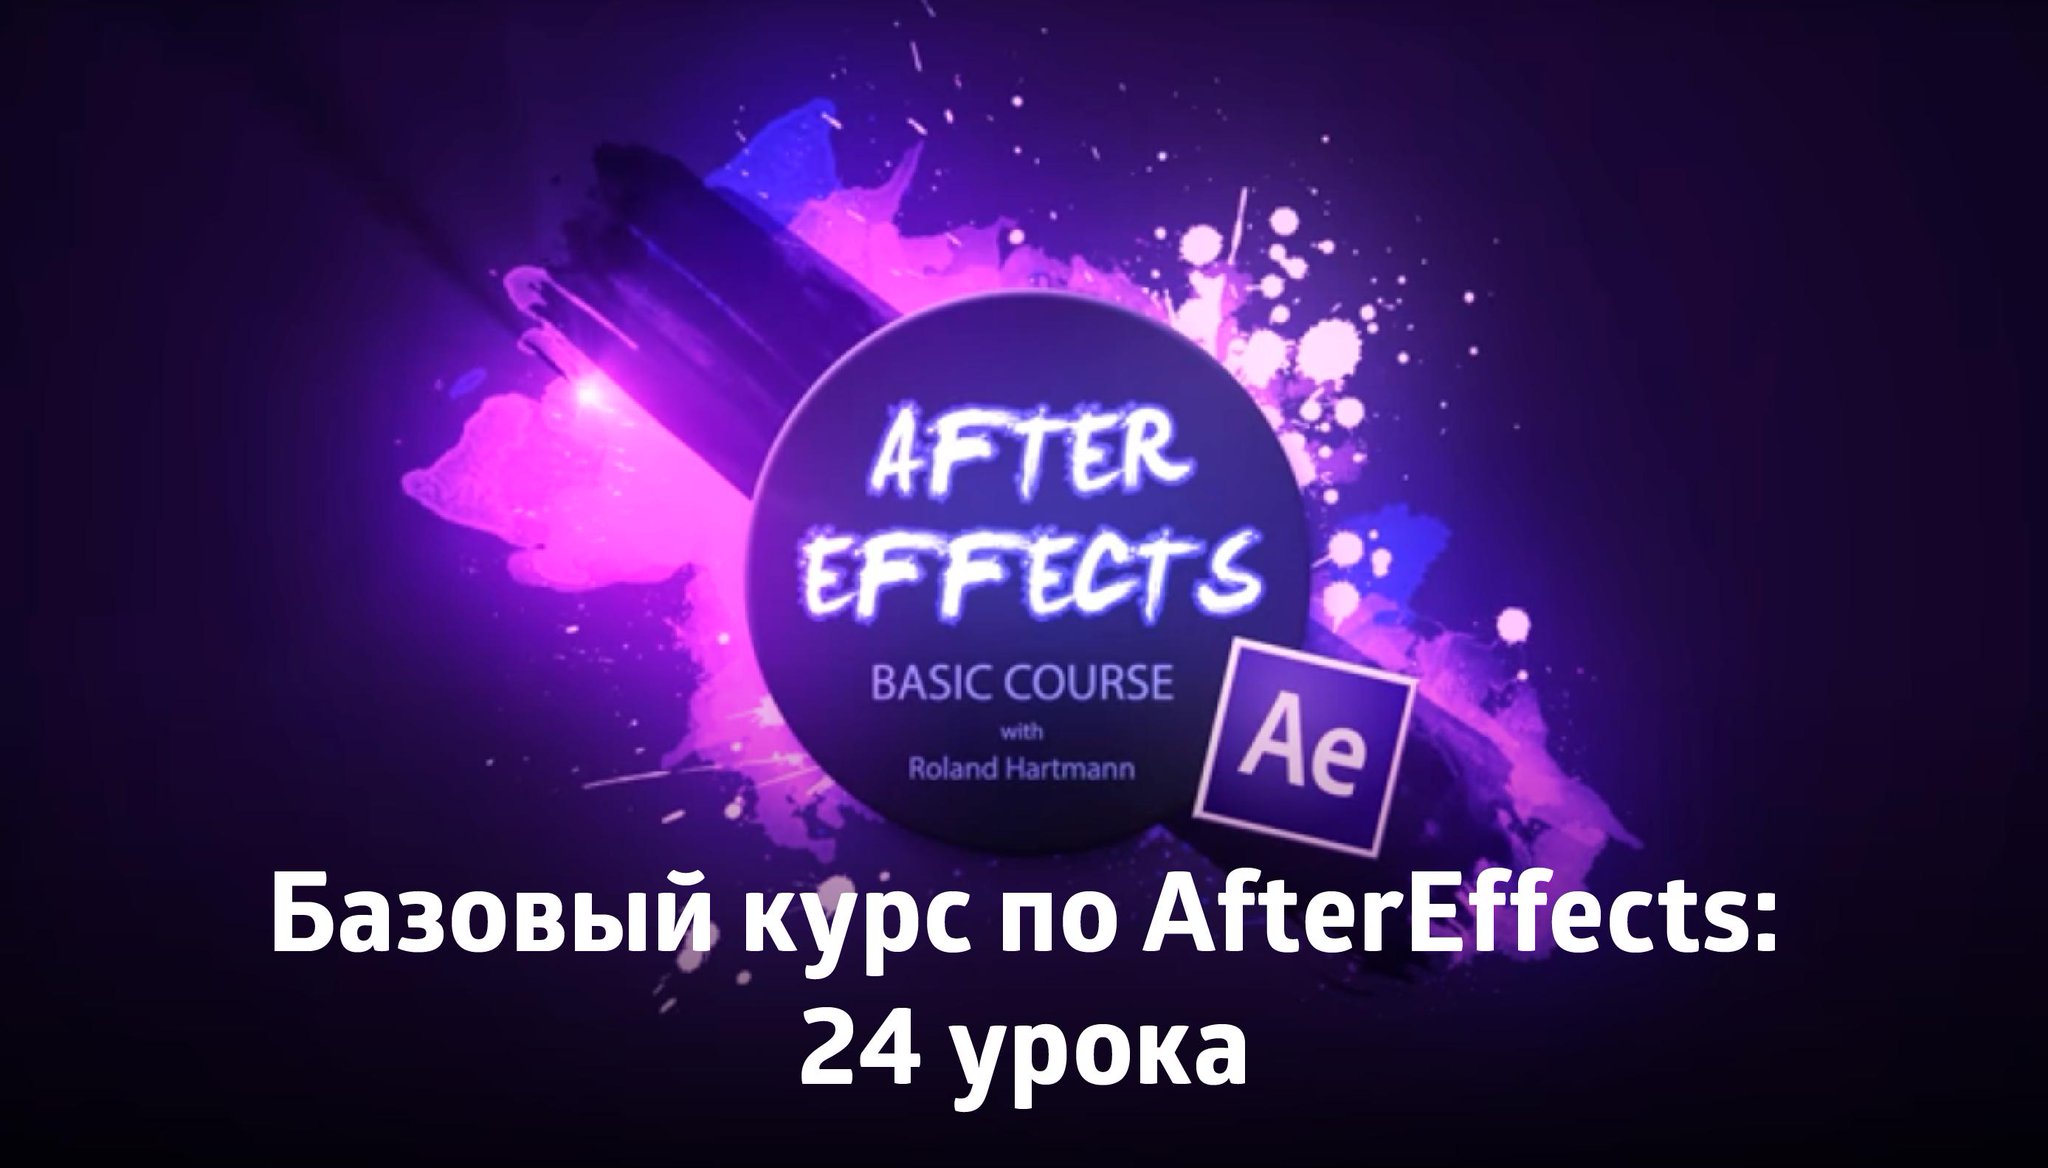 After effects packs. After Effects. Adobe after Effects. After Effects фото. After Effects курсы.